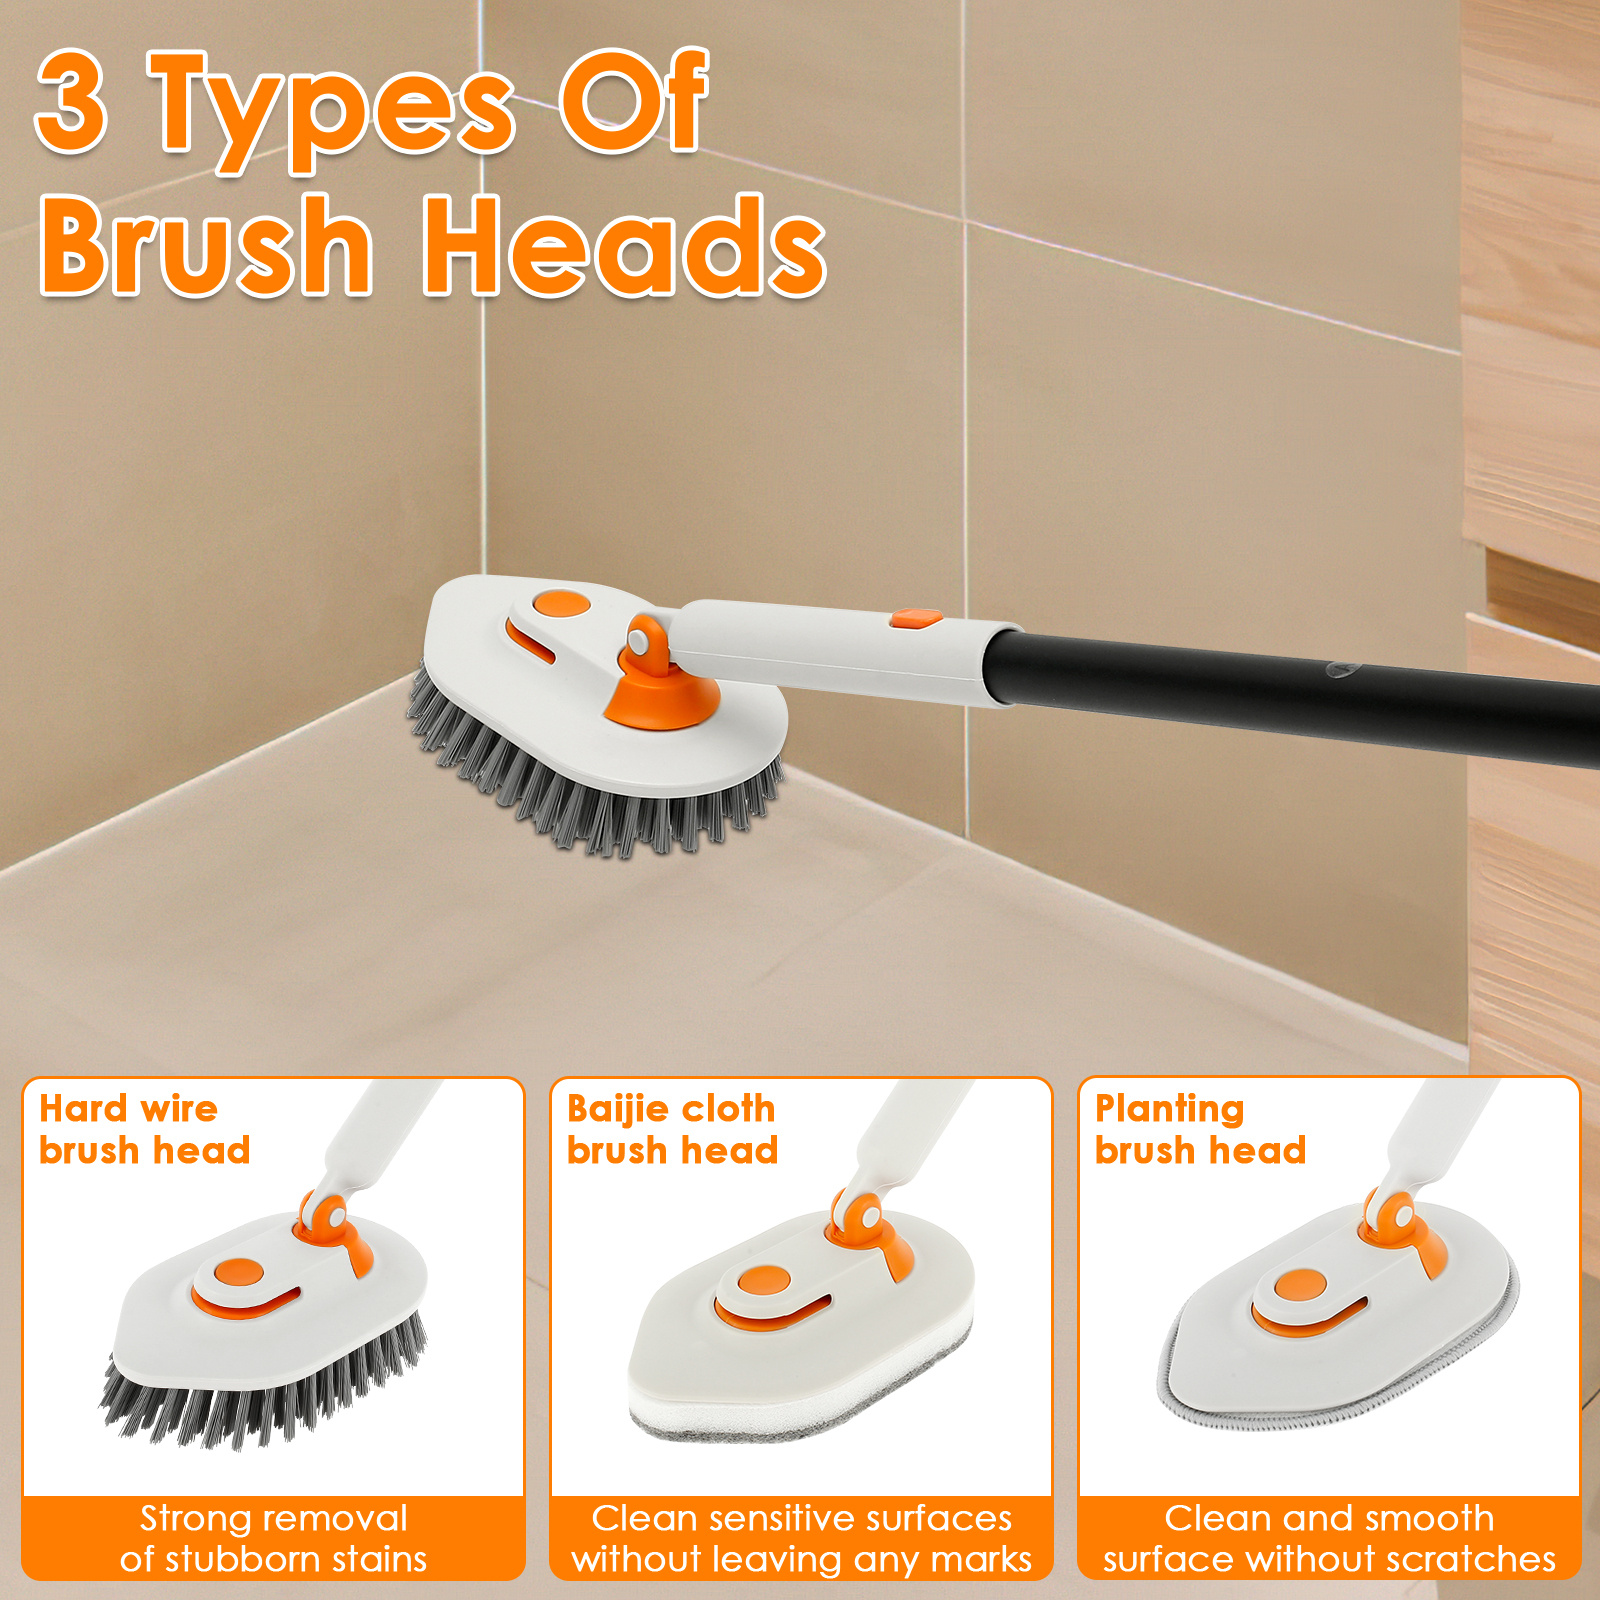 Long Handle Tub And Tile Cleaning Sponge Brush, Multi-functional Bathroom  Floor Wall Tile Cleaning Brush, Removable Tub Tile Scrubber Brush, Wall Scrubber  Brush, Household Sponge Brush, Cleaning Supplies, Cleaning Tool, Back To